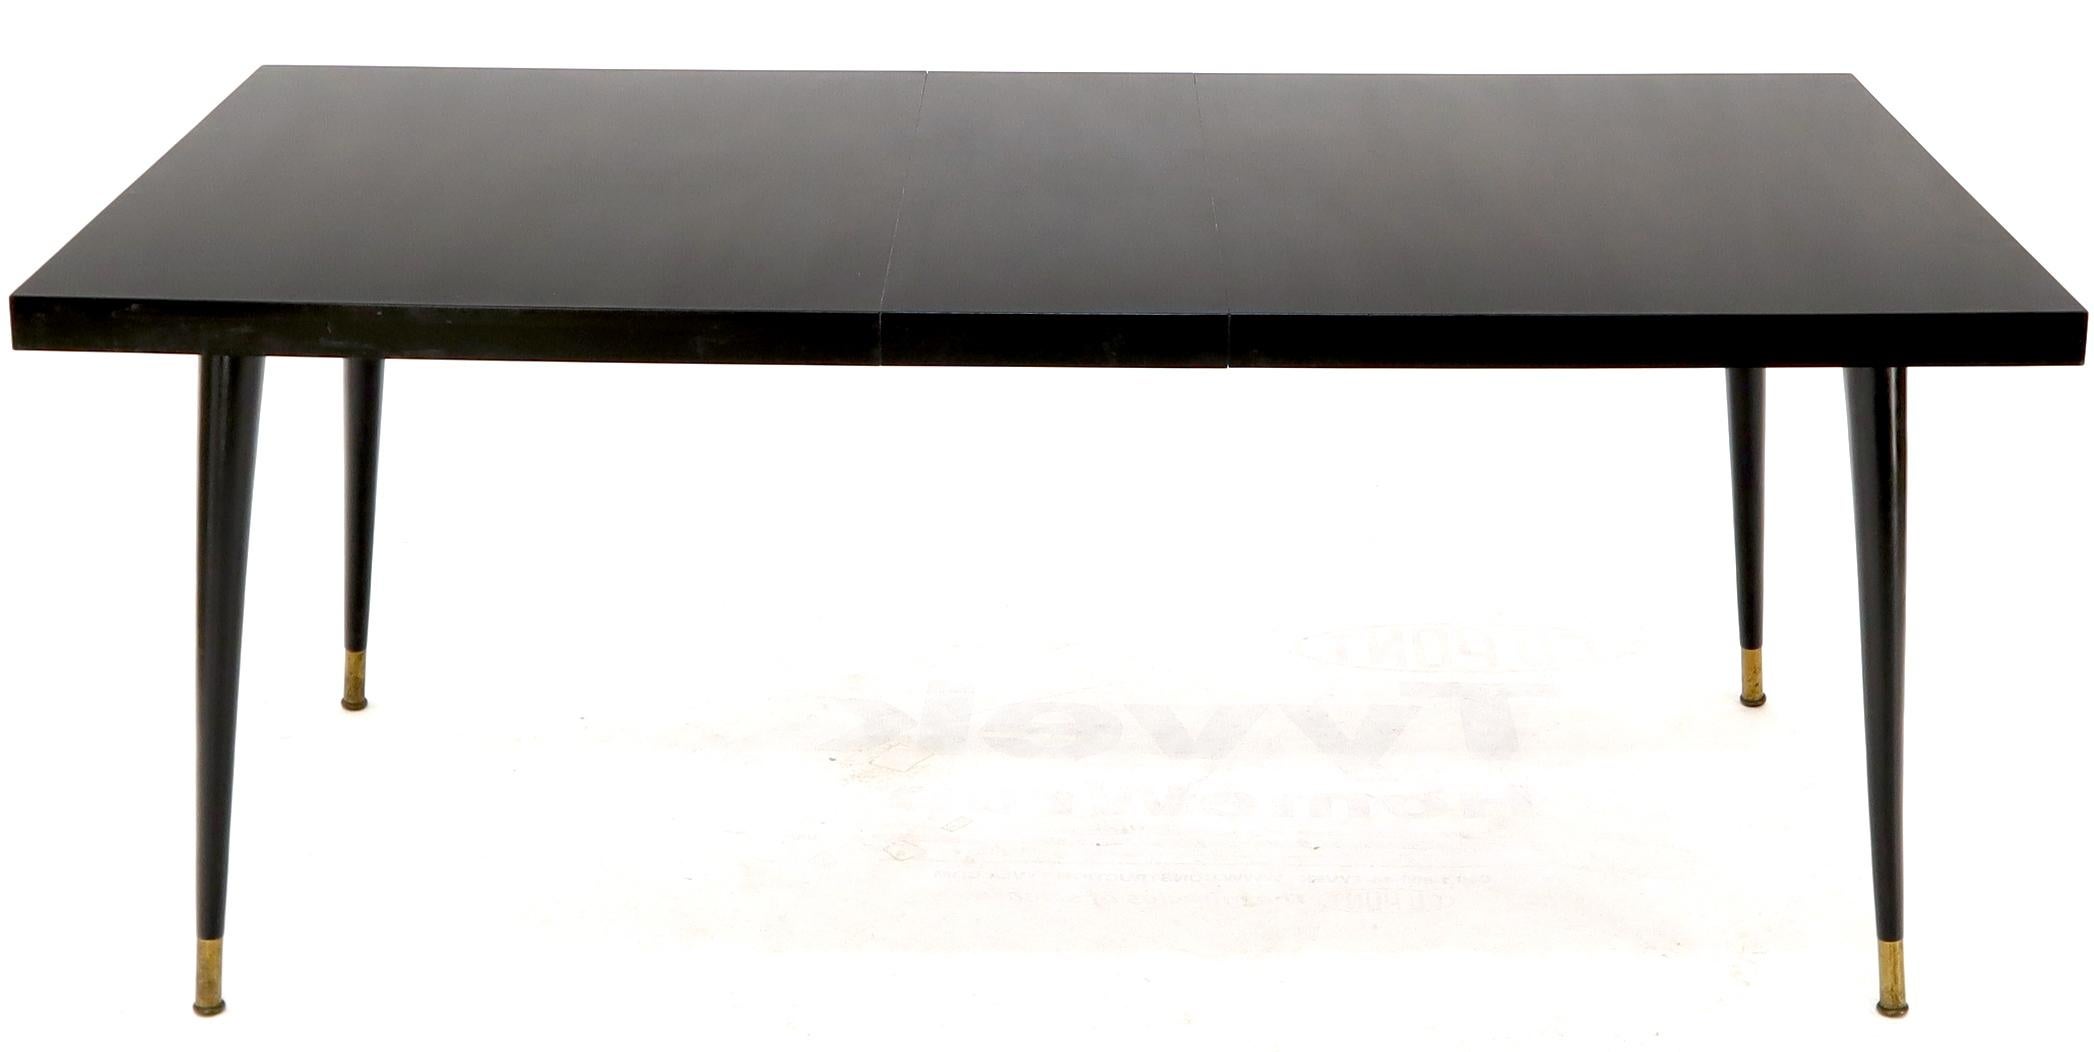 Mid-Century Modern simple design very fine craftsmanship quality black laminate dining table with 1 12